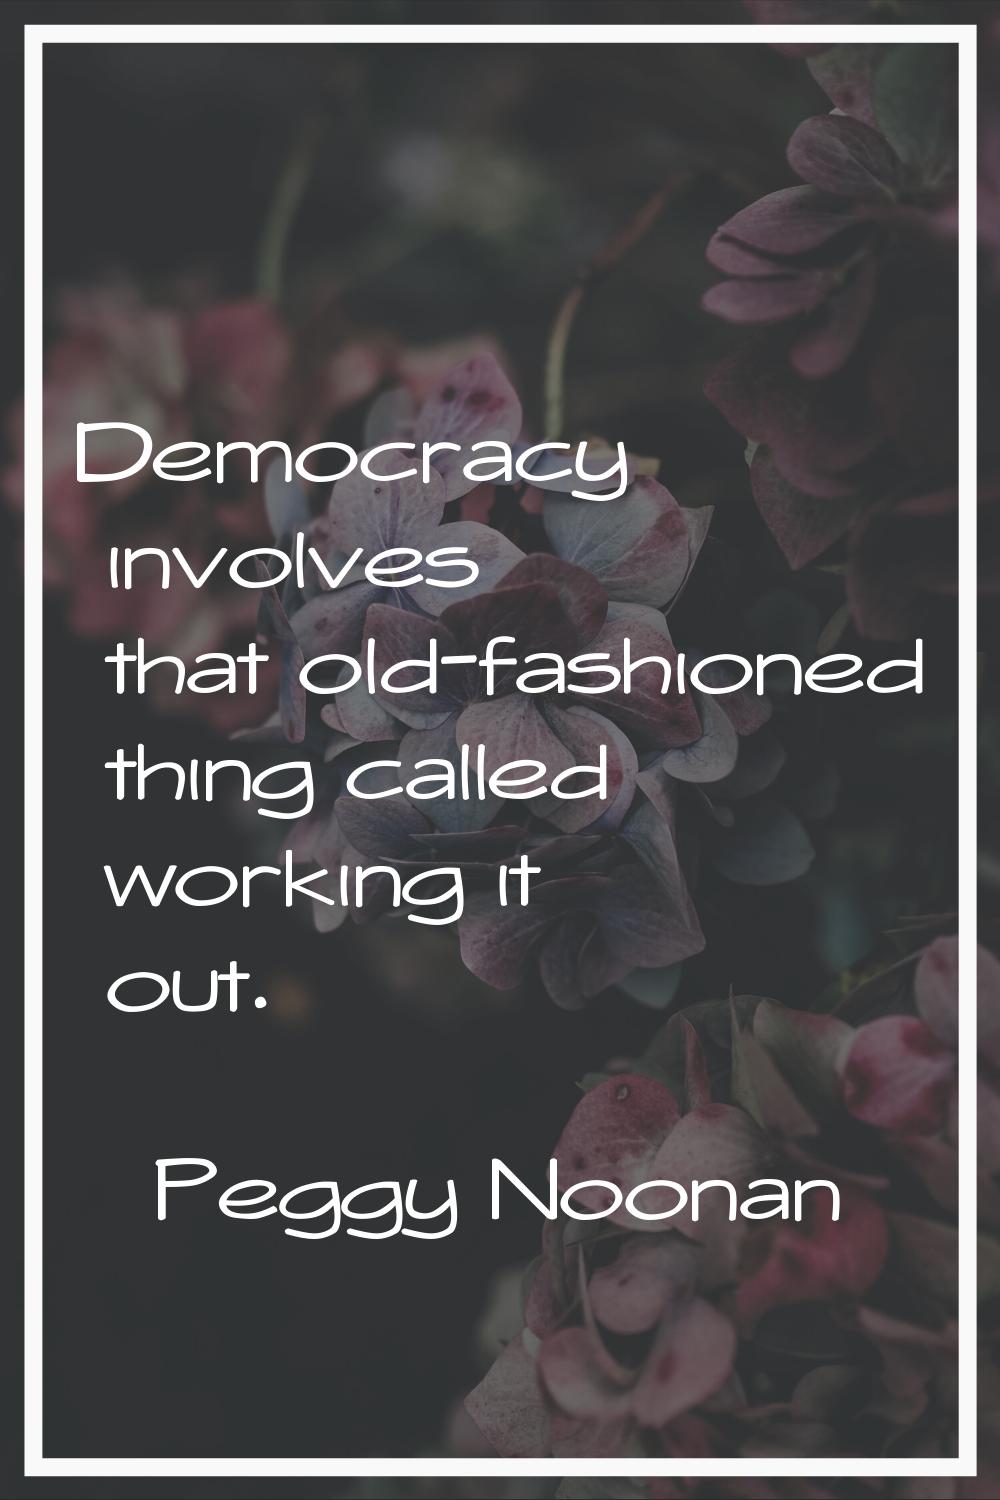 Democracy involves that old-fashioned thing called working it out.